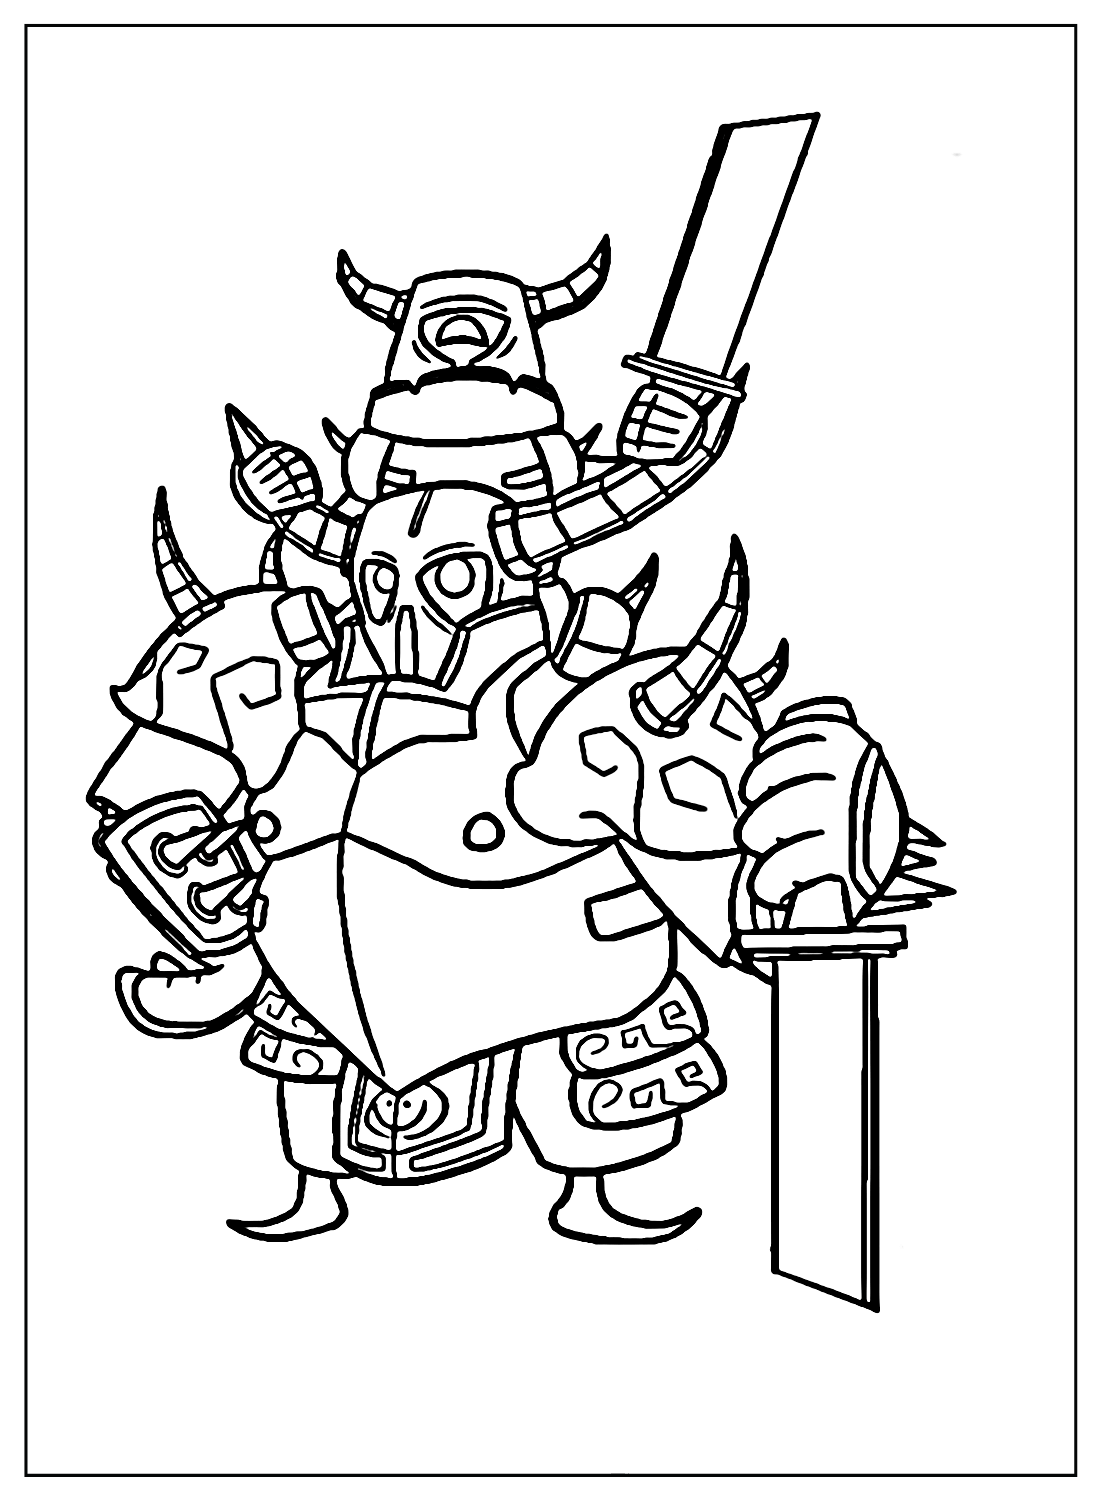 Free Pekka Coloring Pages from Clash of Clans